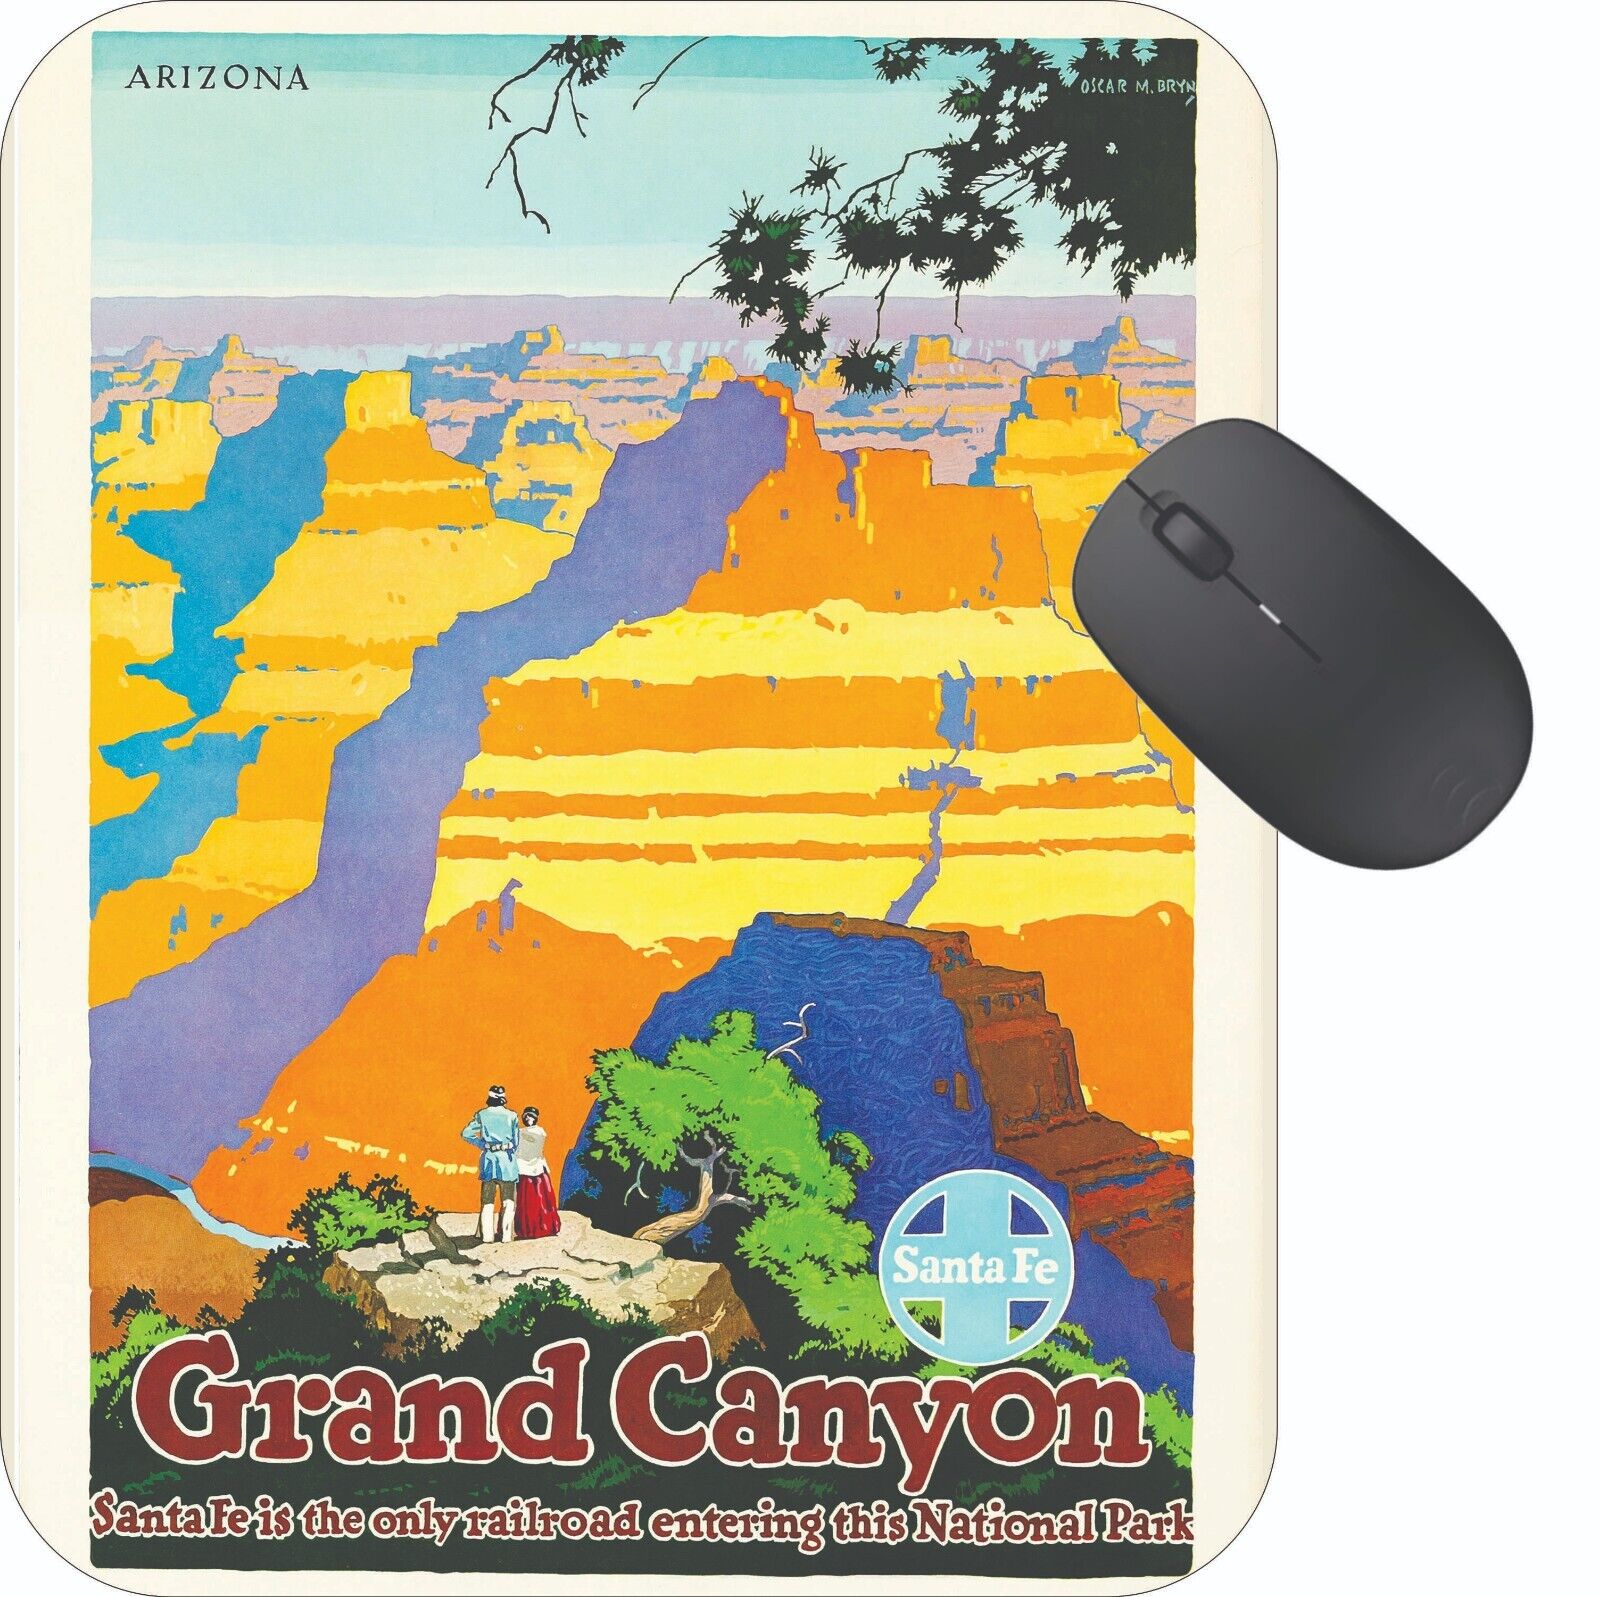 Grand Canyon Mouse Pad Stunning Photos Travel Poster Art Vintage Retro 1930s